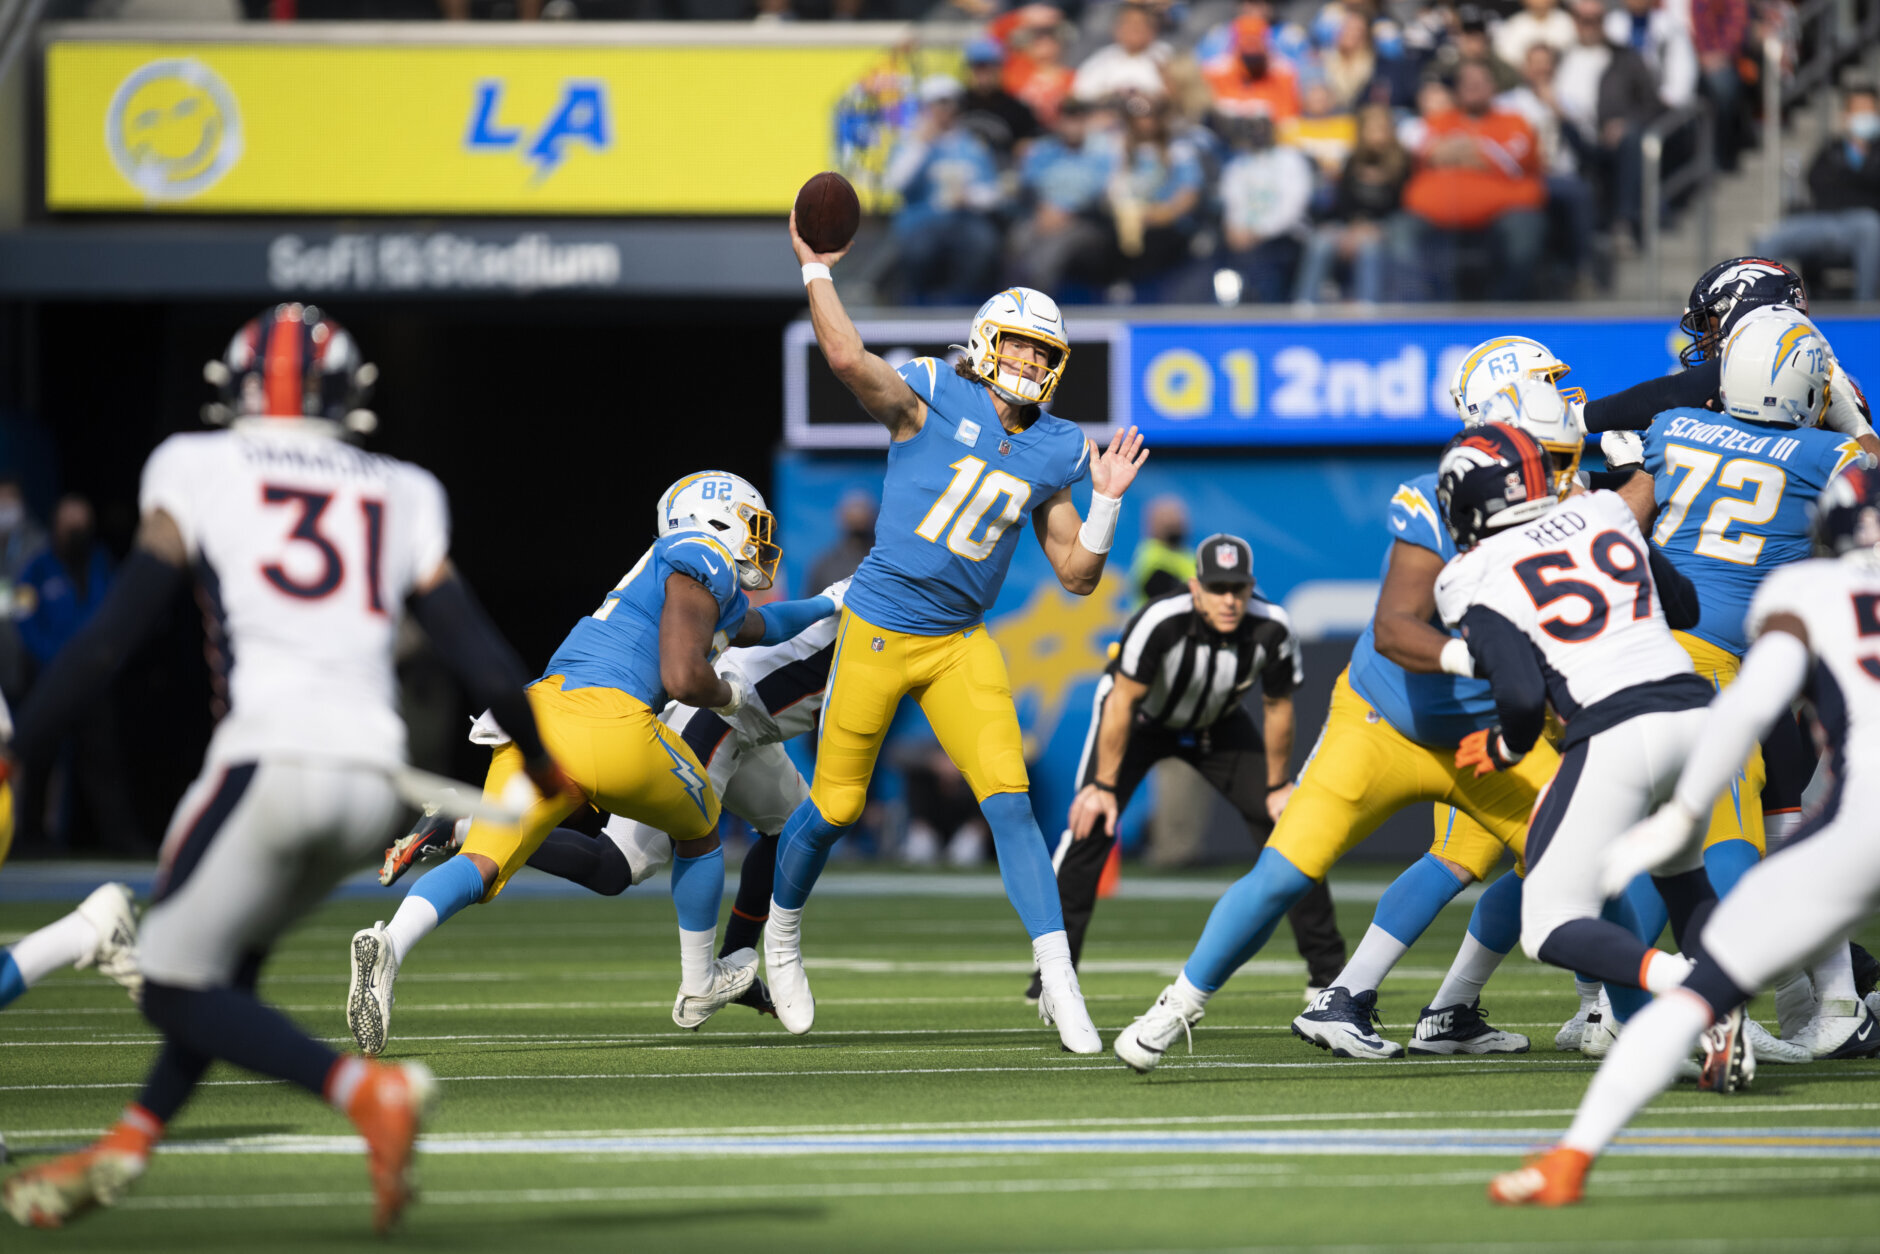 <p><em><strong>Broncos 13</strong></em><br />
<em><strong>Chargers 34</strong></em></p>
<p>With the way Justin Herbert is playing and how hot Derek Carr is of late, <a href="https://profootballtalk.nbcsports.com/2022/01/02/week-18-schedule-changes-chargers-raiders-moves-to-sunday-night-football/" target="_blank" rel="noopener">Chargers at Raiders is absolutely the right call as the Sunday night finale in Week 18</a>. Now <em>that&#8217;s</em> a prime-time matchup.</p>
